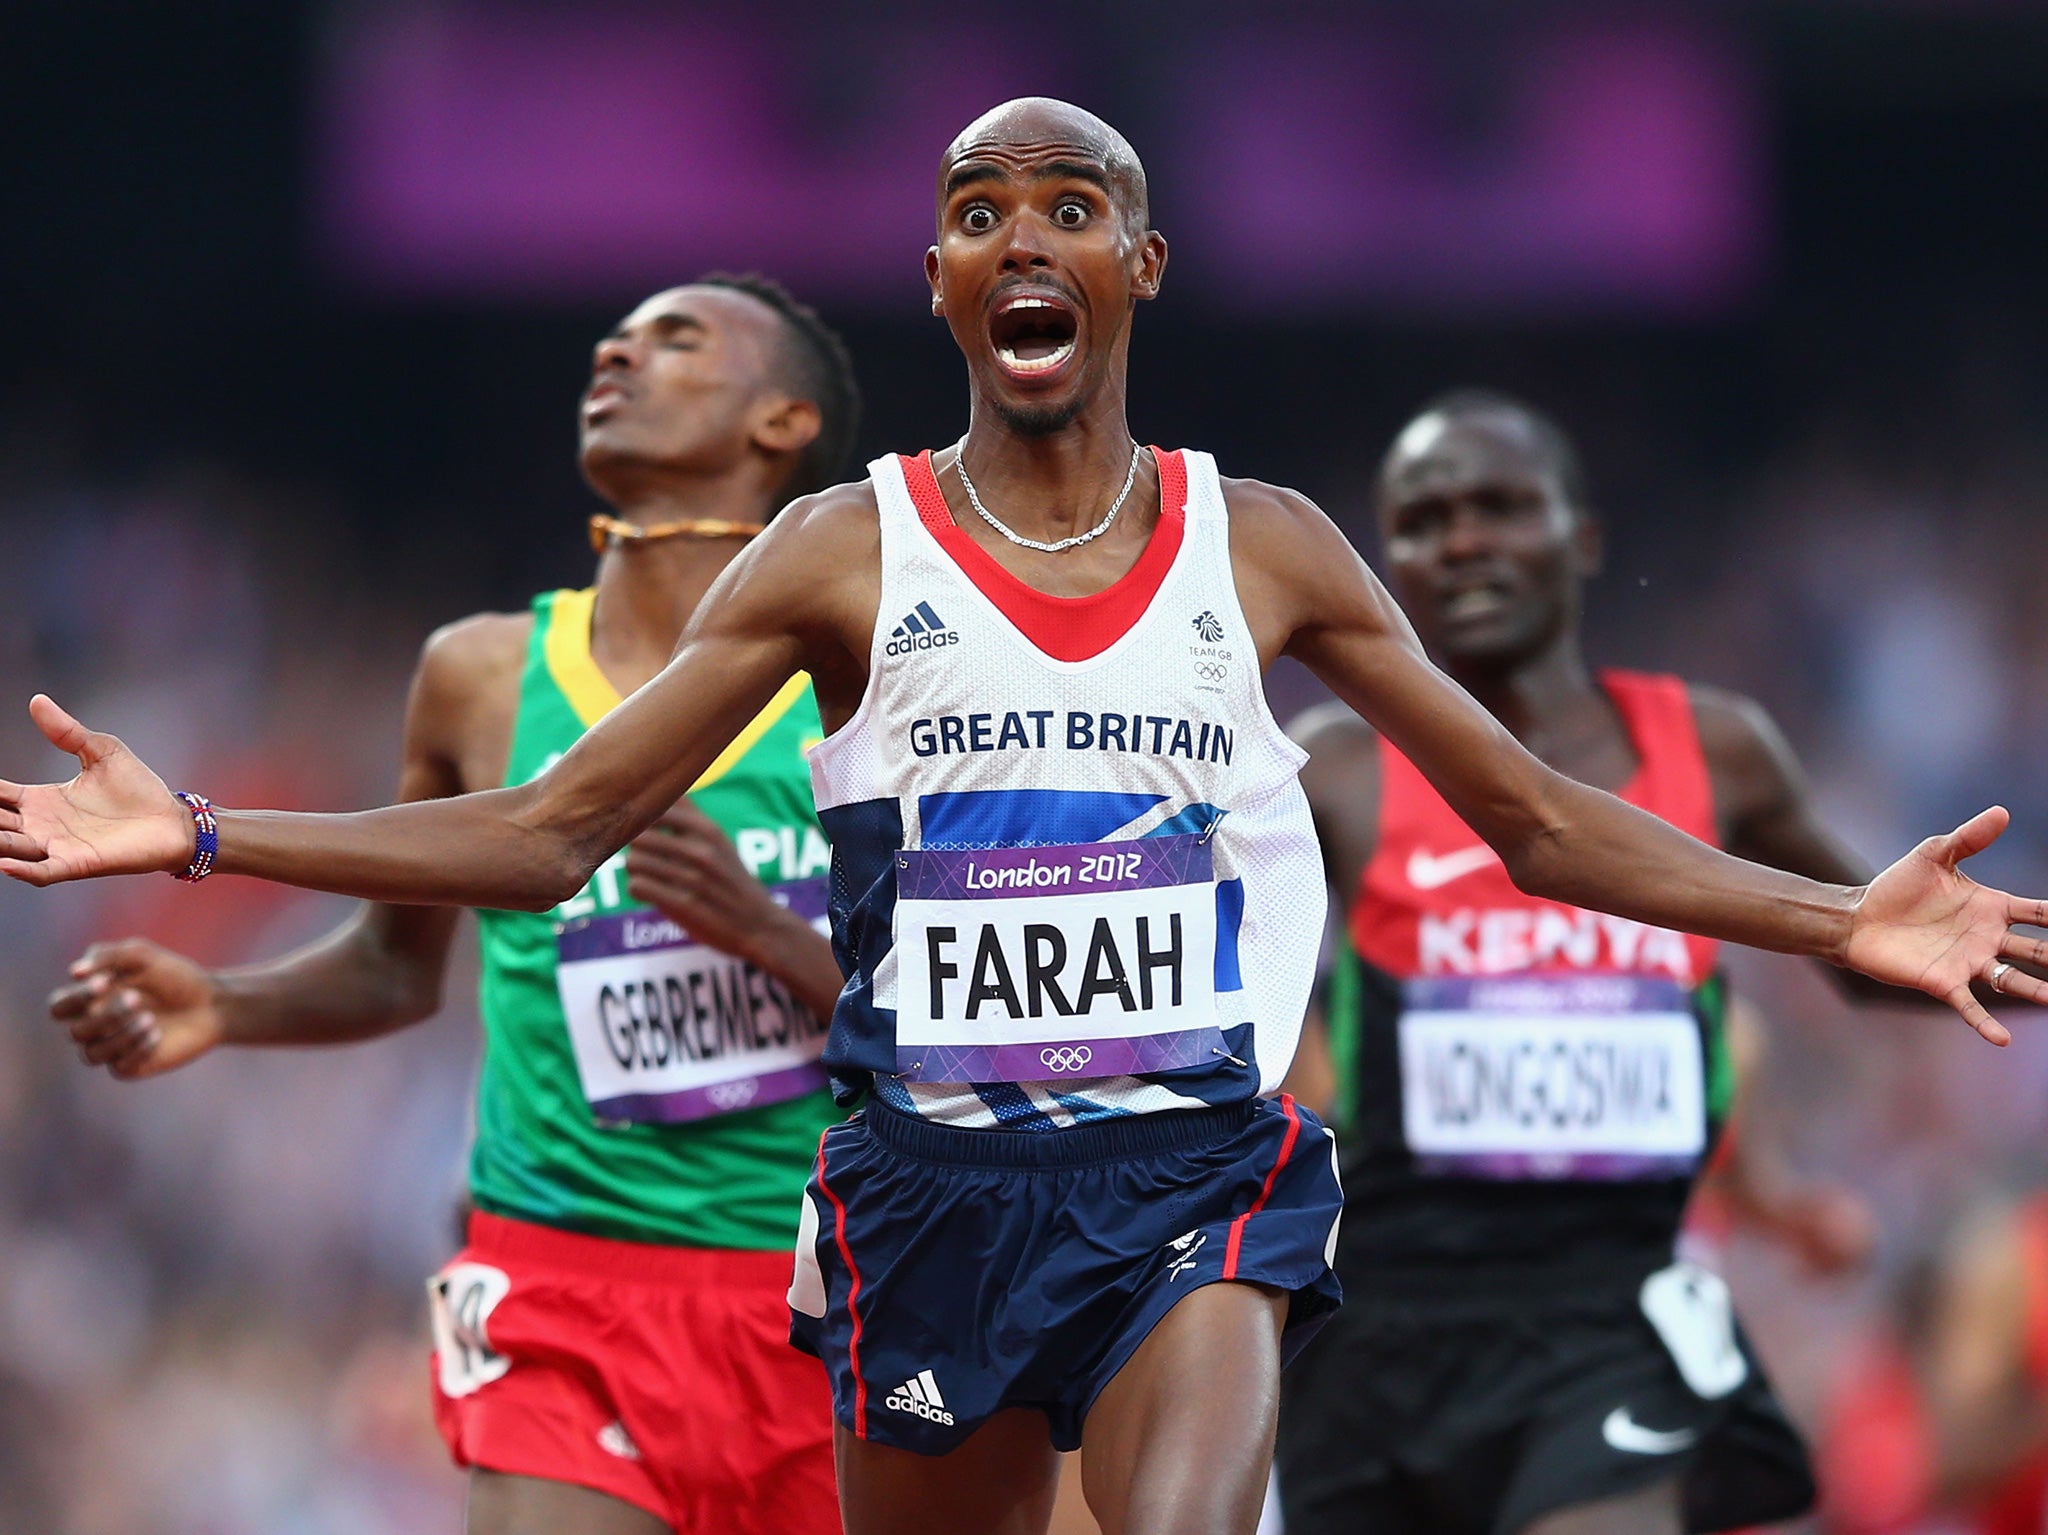 Farah crossing the line to win the 5,000m in 2012